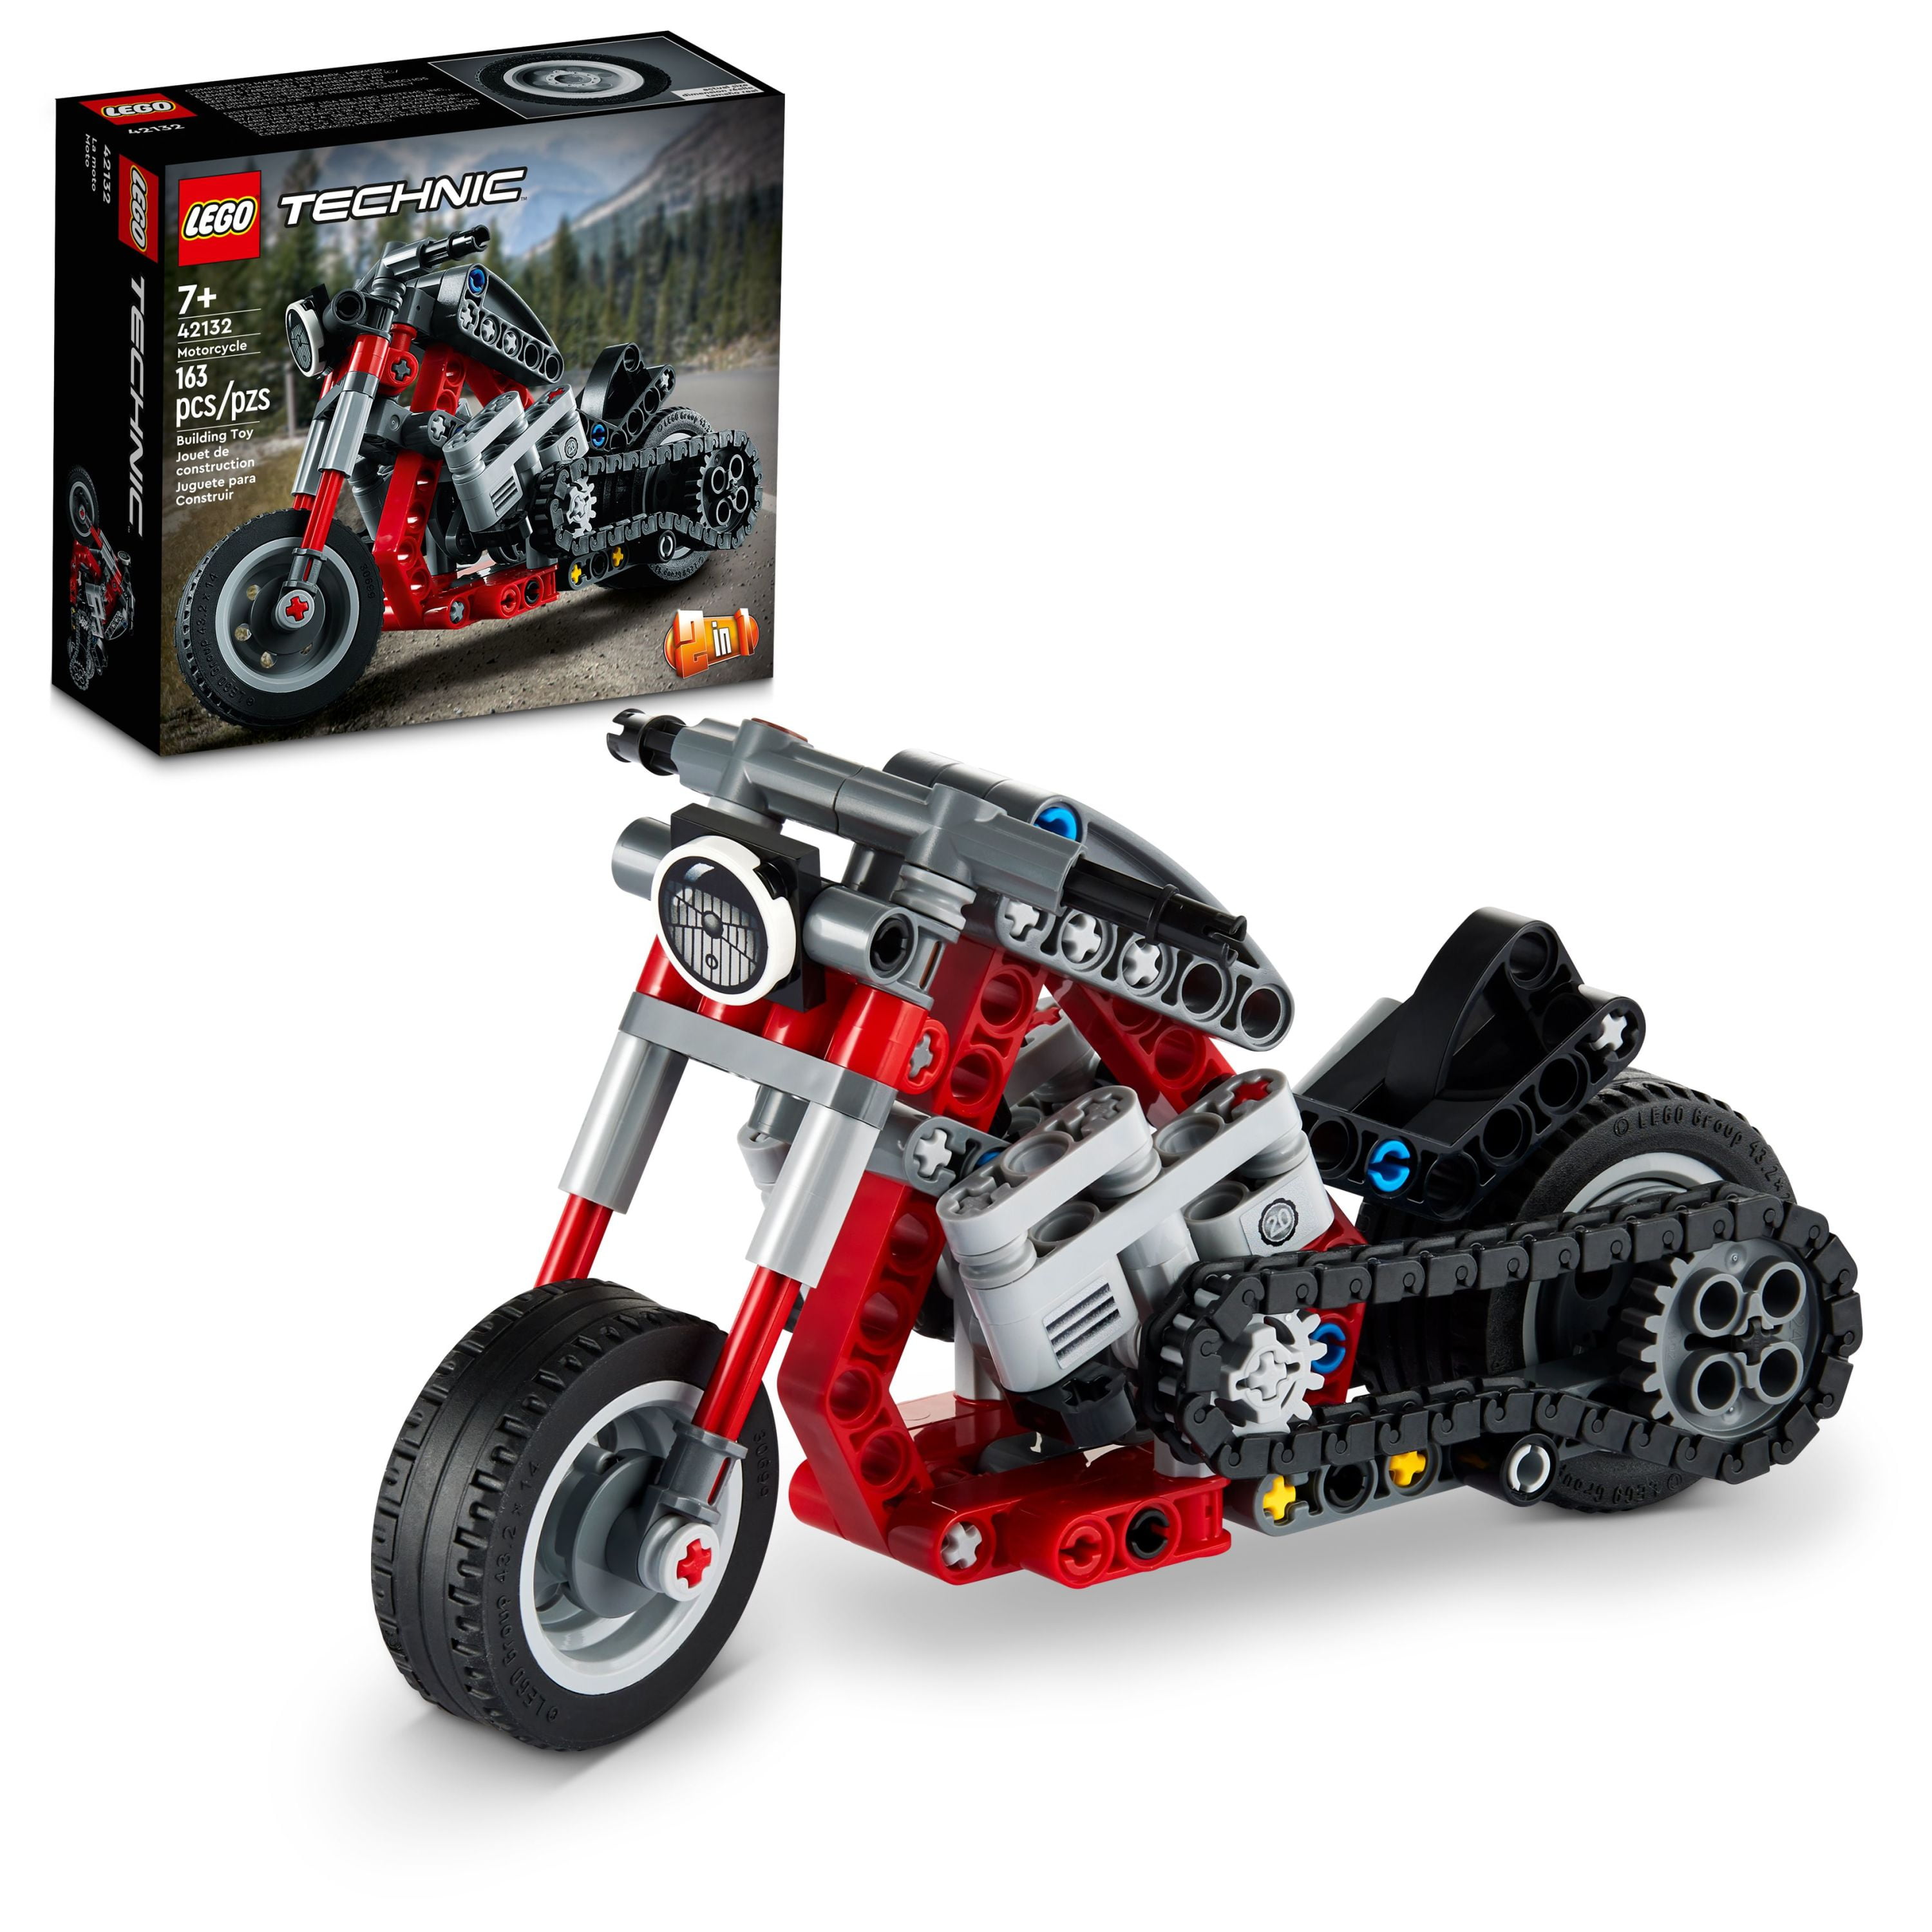 LEGO Technic Motorcycle to Adventure Bike 2 in 1 Model Building Set 42132, Motorcycle Toy, Construction Toys Birthday Gift for Kids, Boys and Girls